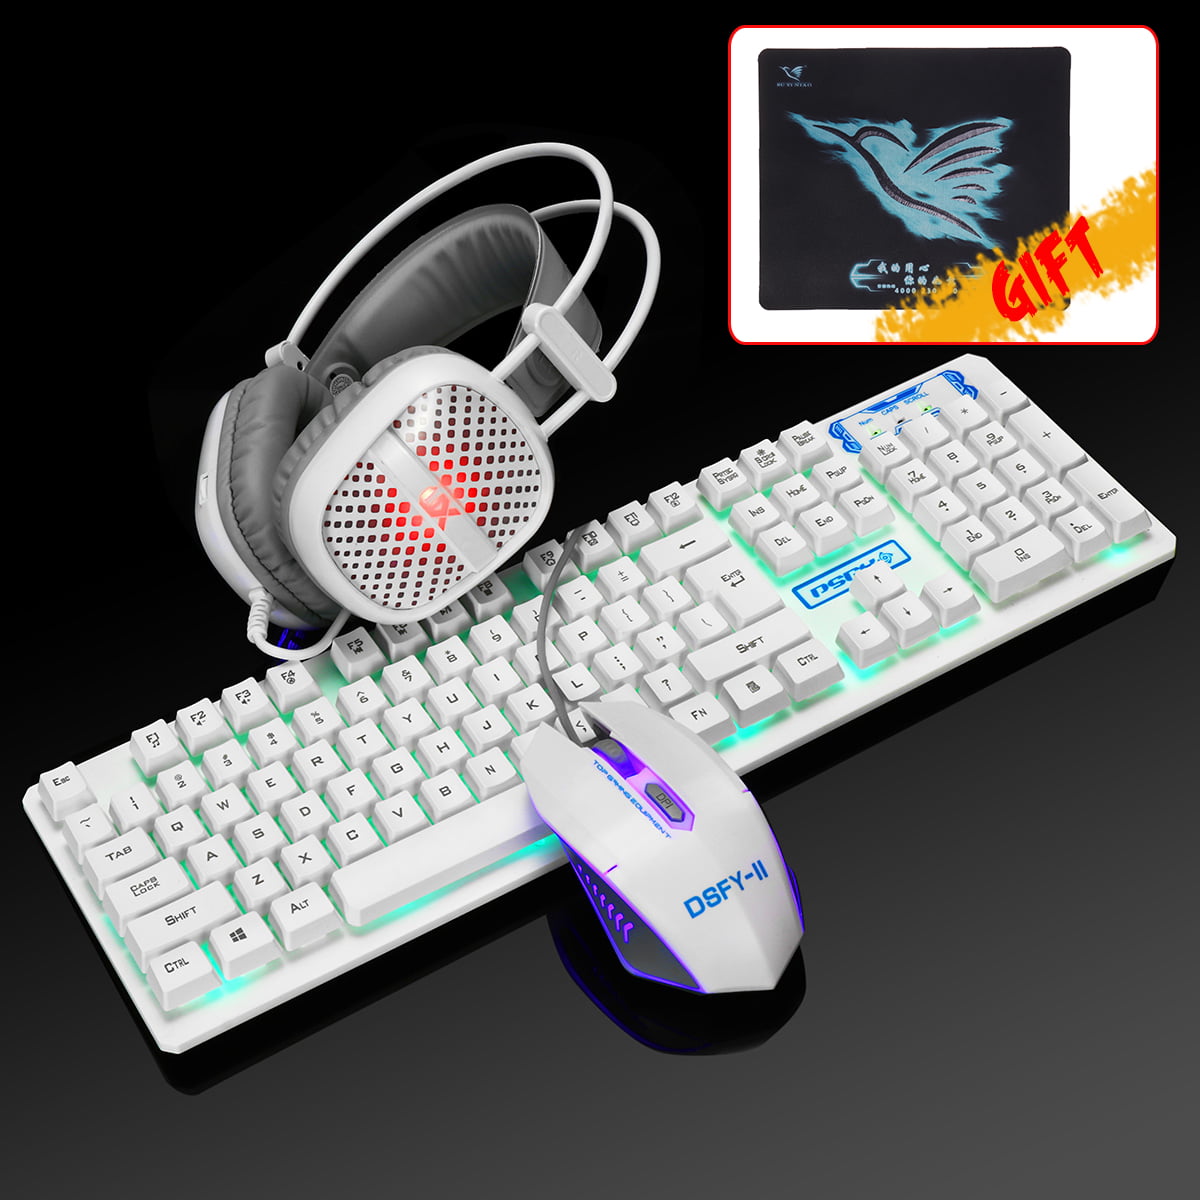 Wired Game Keyboard and Mouse Combo Headset Kit, RGB LED Backlit Mechanical  Feel Keyboard, Mice and Mouse Pad for Computer Gamer Office